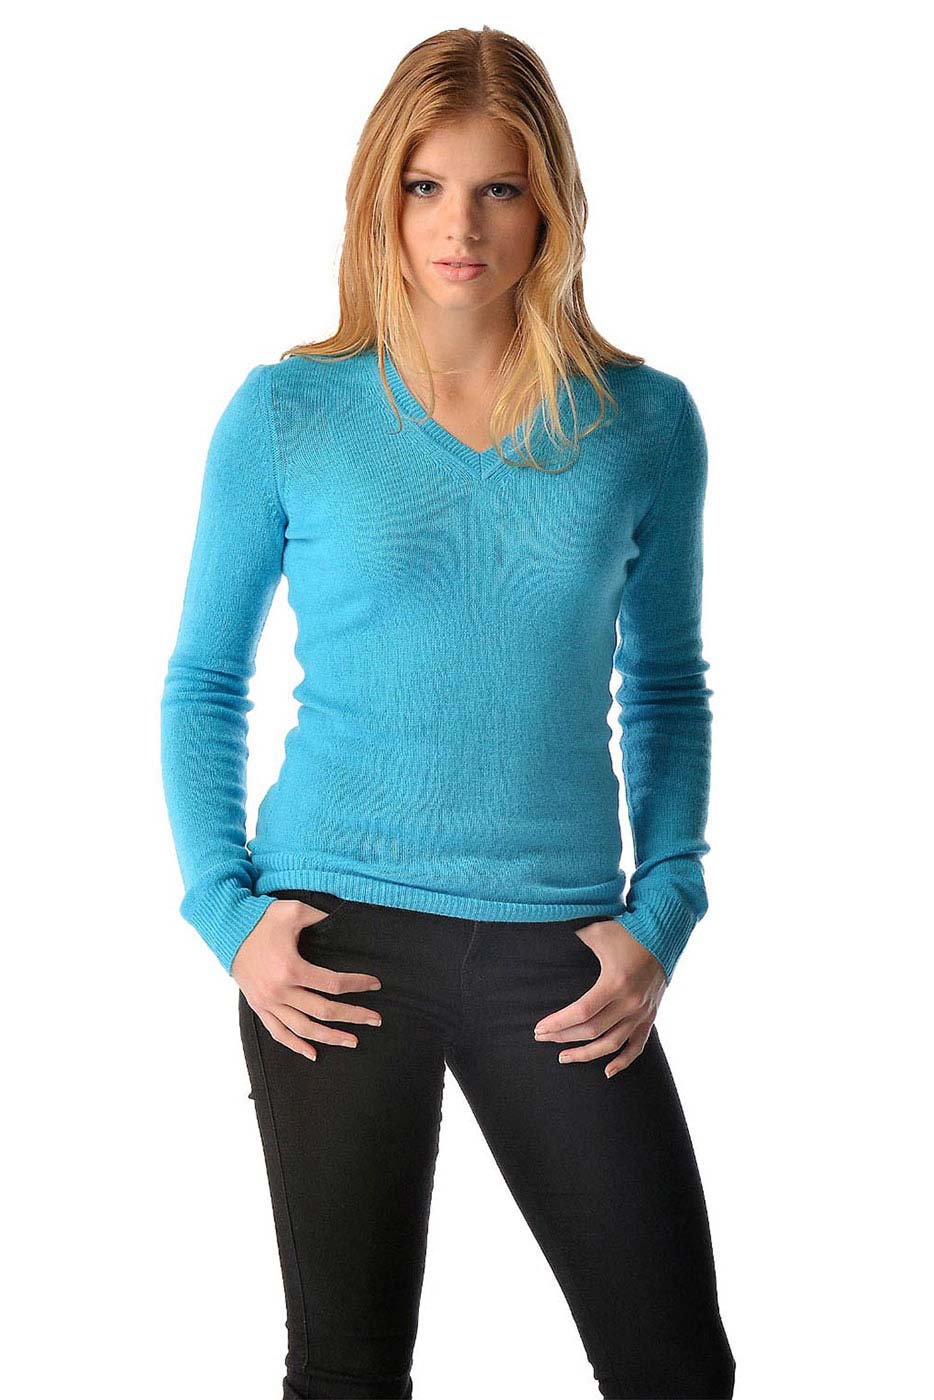 Pure Cashmere V-Neck Spring Sweater for Women (Vanilla, Large)